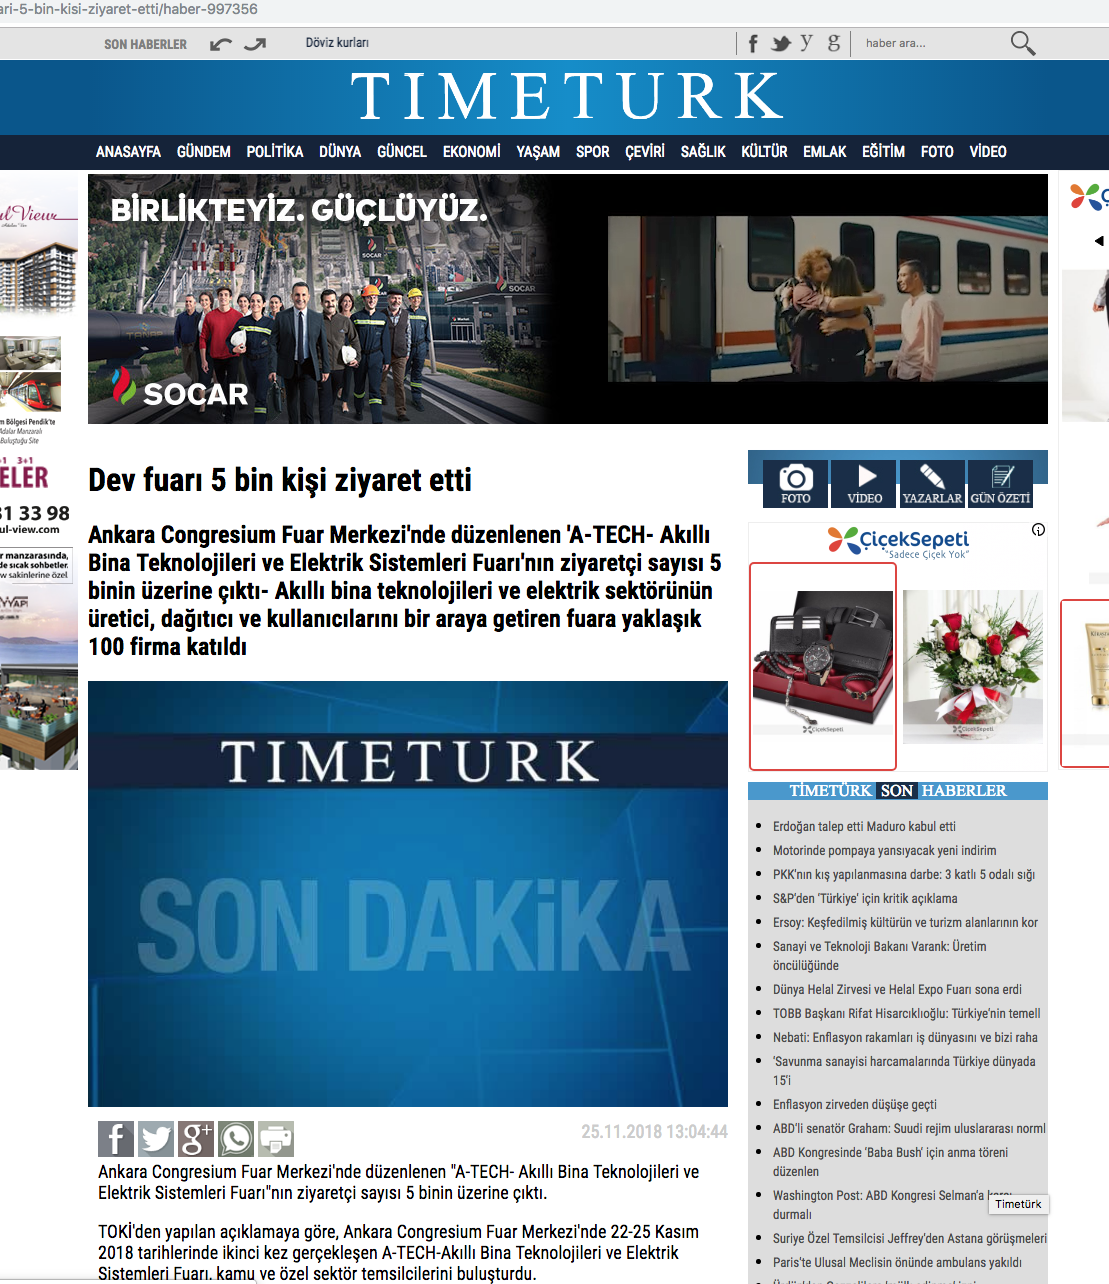 MORE THOUSAND VISITORS CAME TO A-TECH FAIR (TIMETURK)